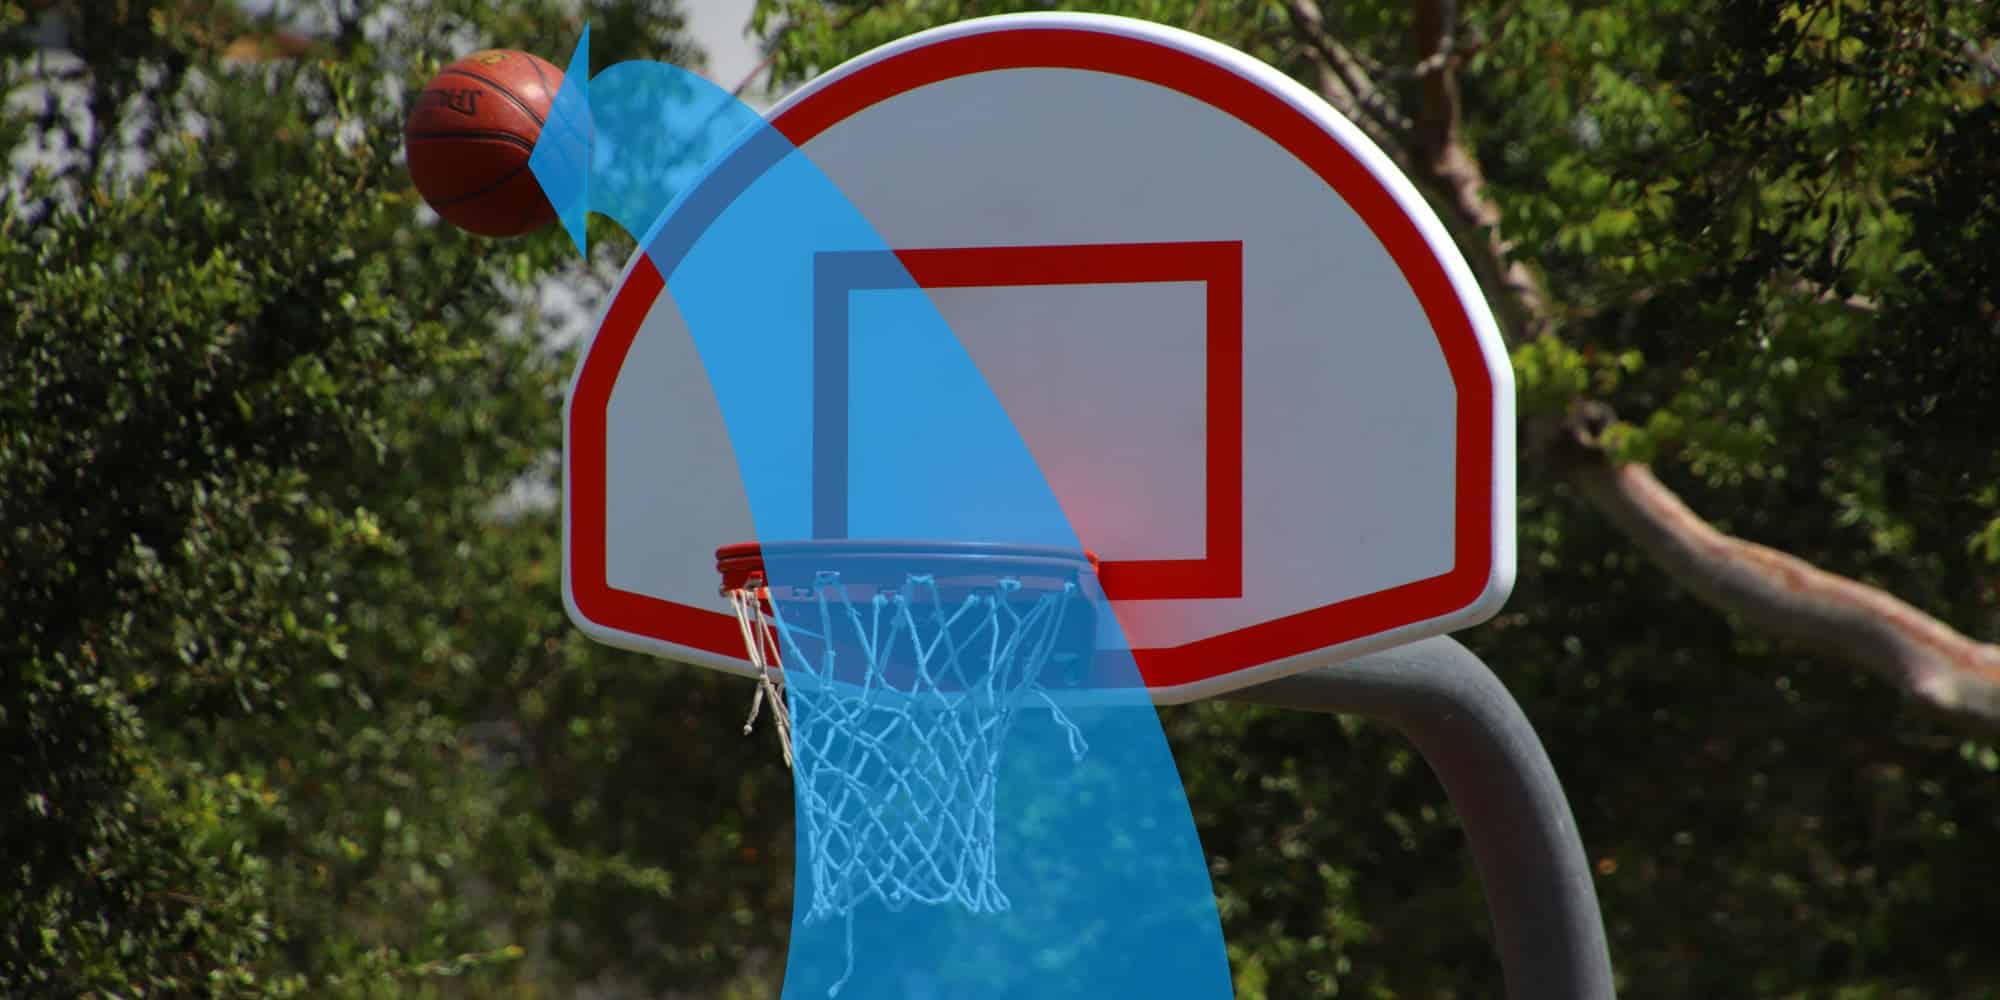 An airball missing the basket and backboard completely